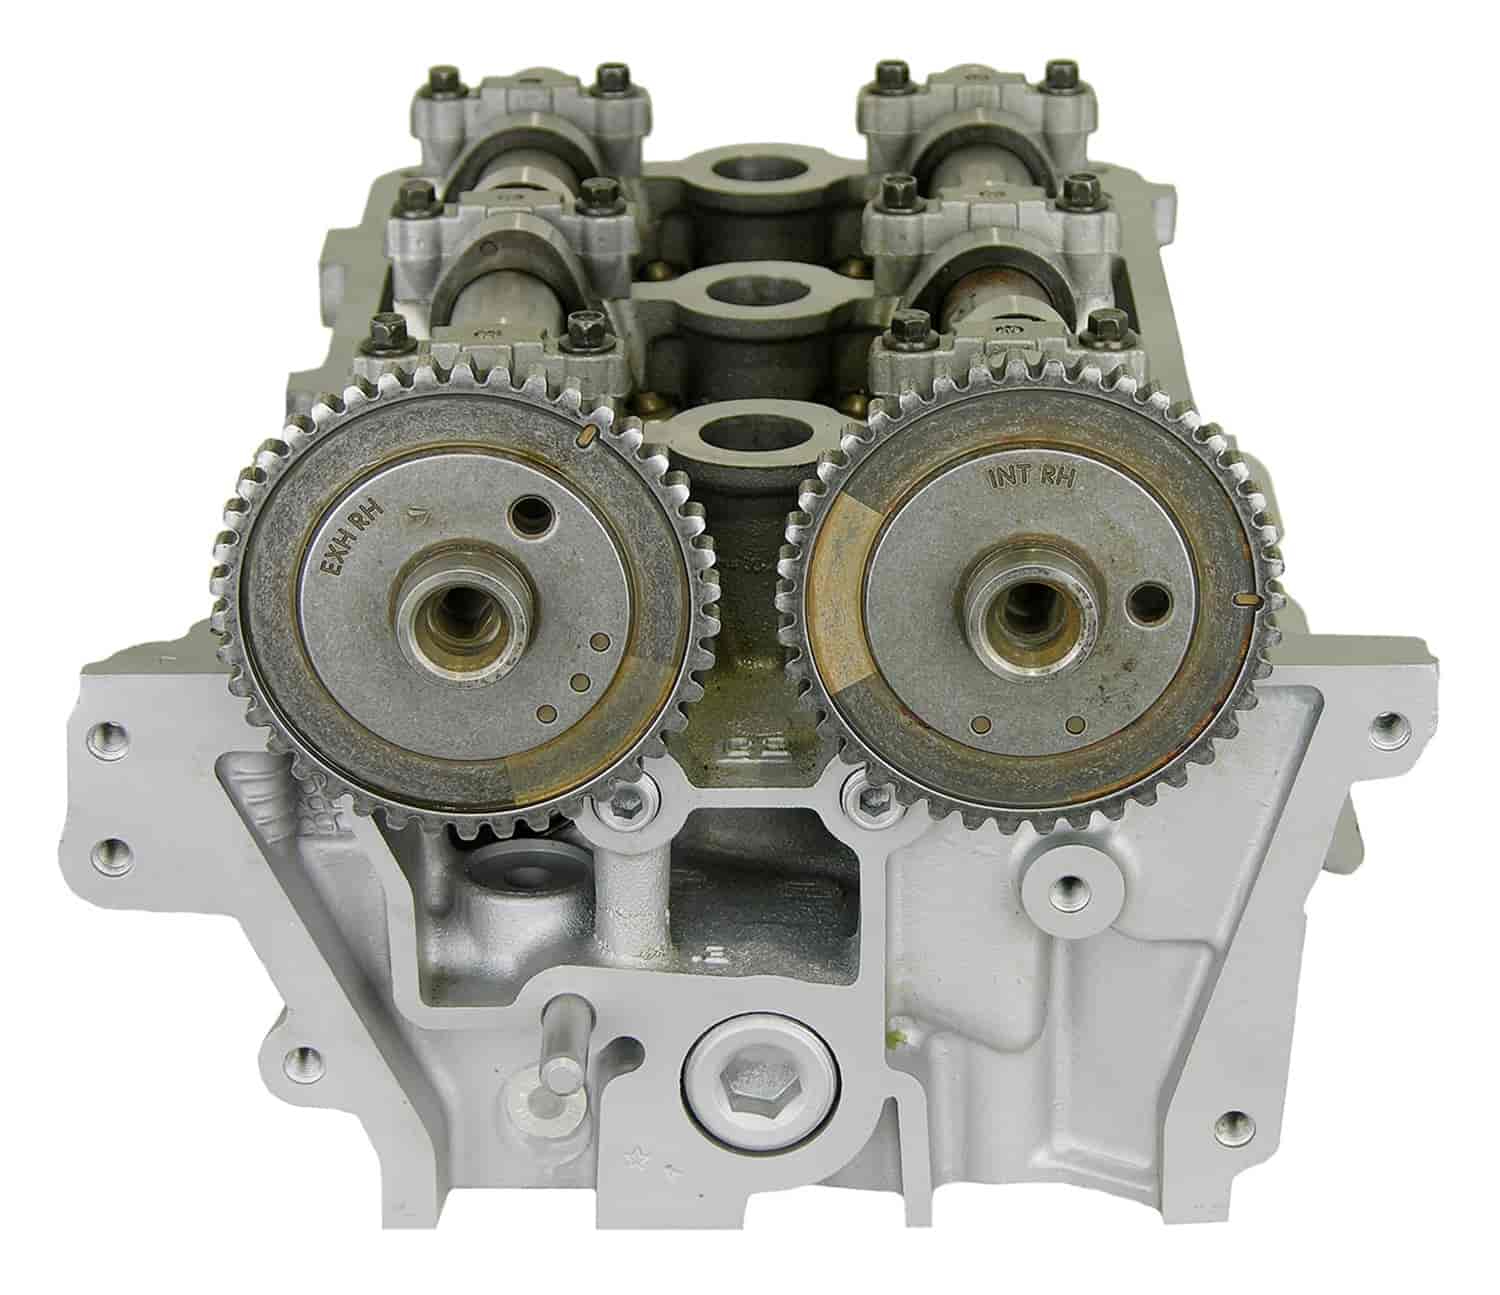 Remanufactured Cylinder Head for 2000-2008 Ford/Mazda/Mercury